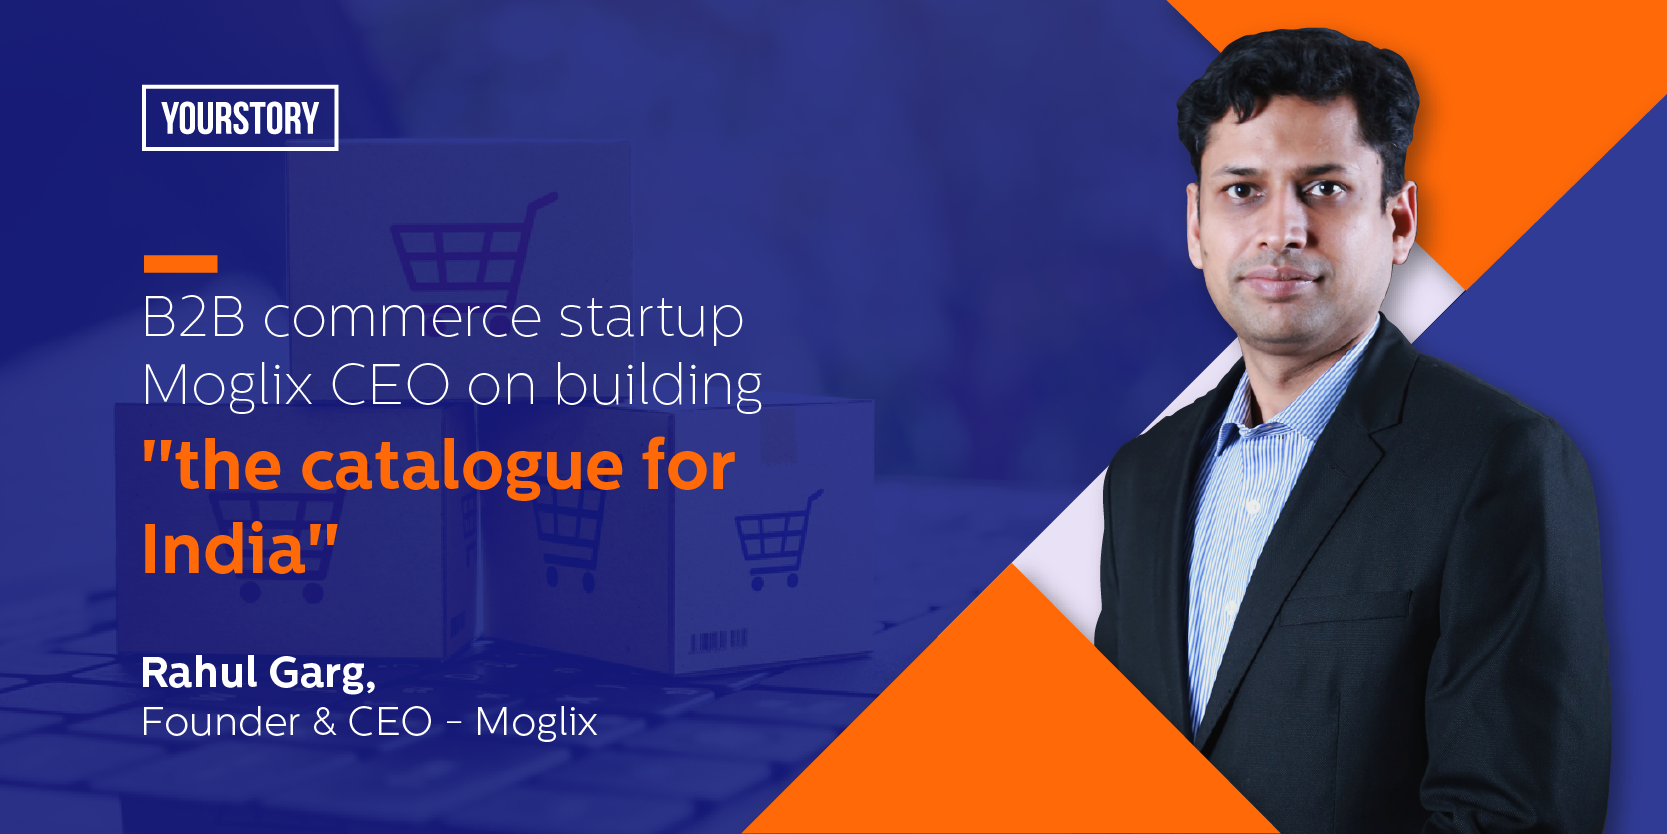 B2B ecommerce startup Moglix CEO on building "the catalogue for India"